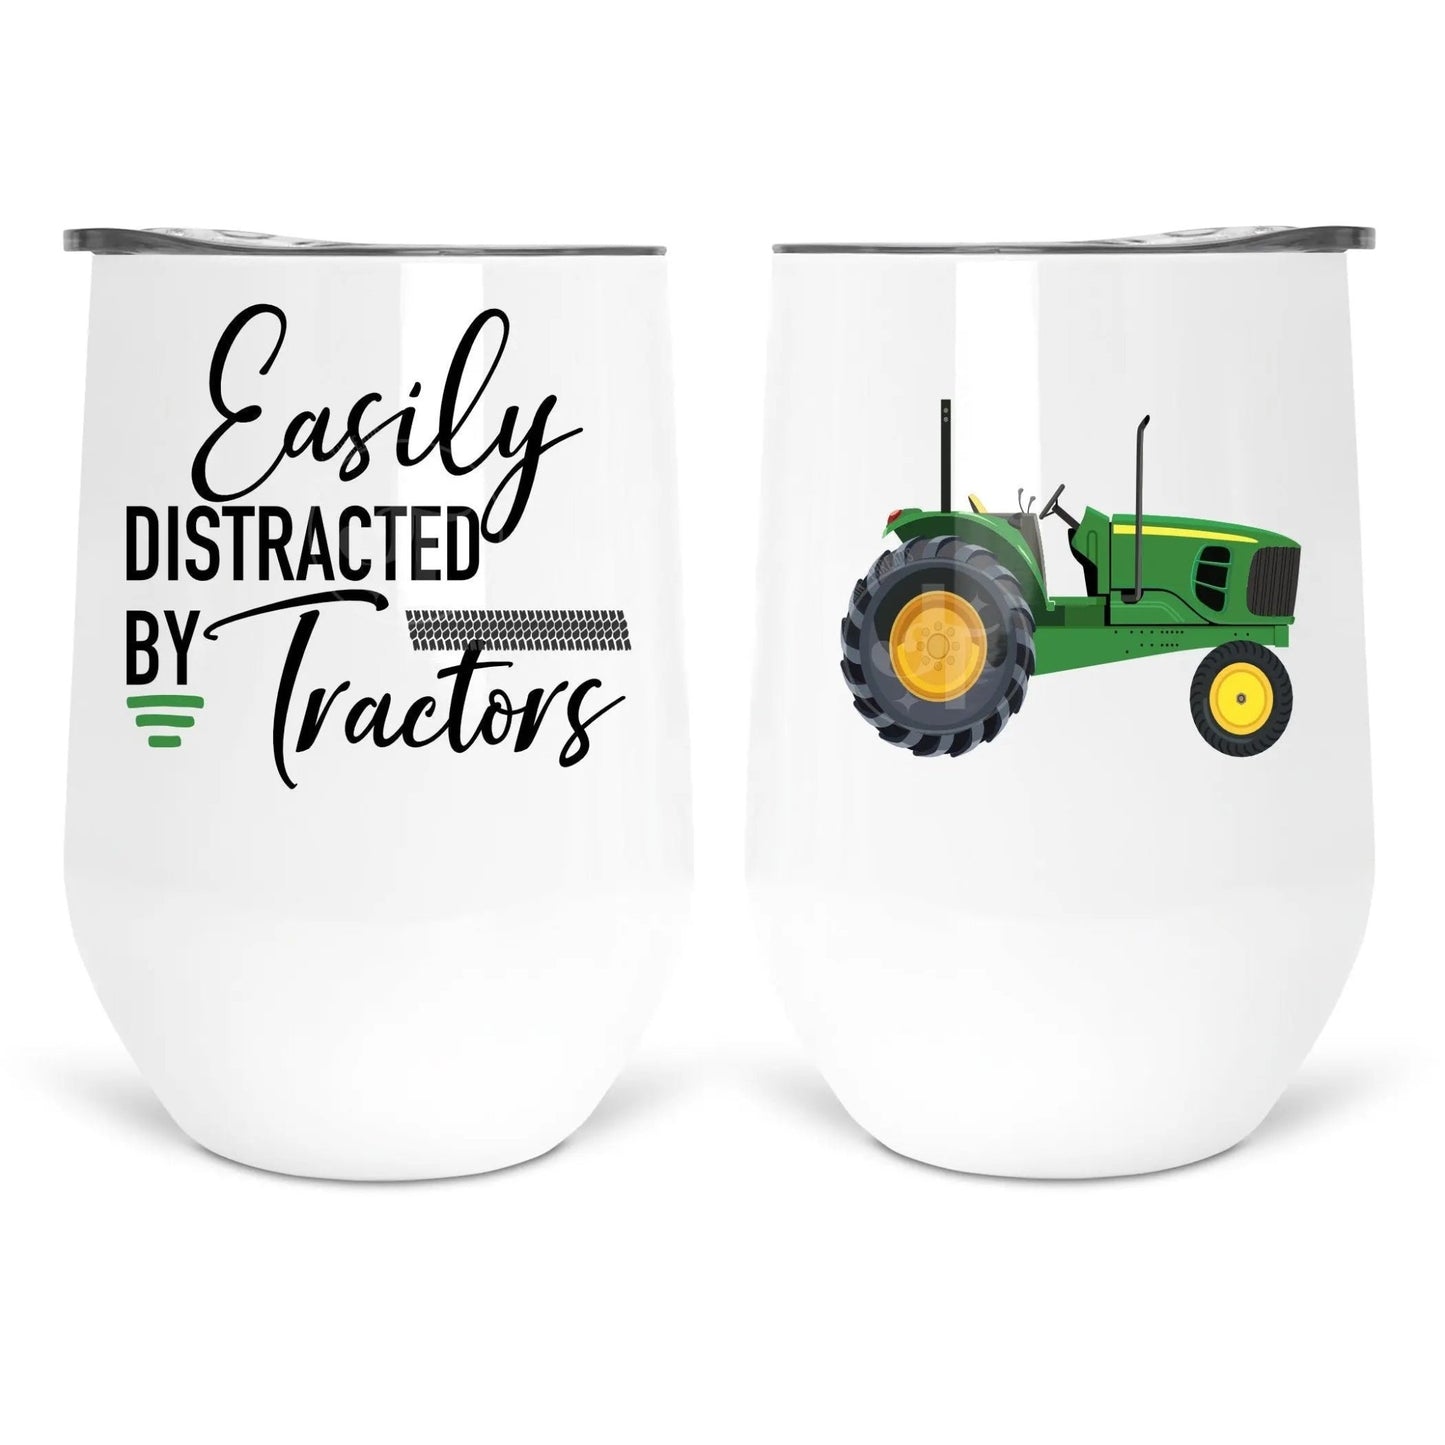 Easily Distracted by Tractors - Jammin Threads